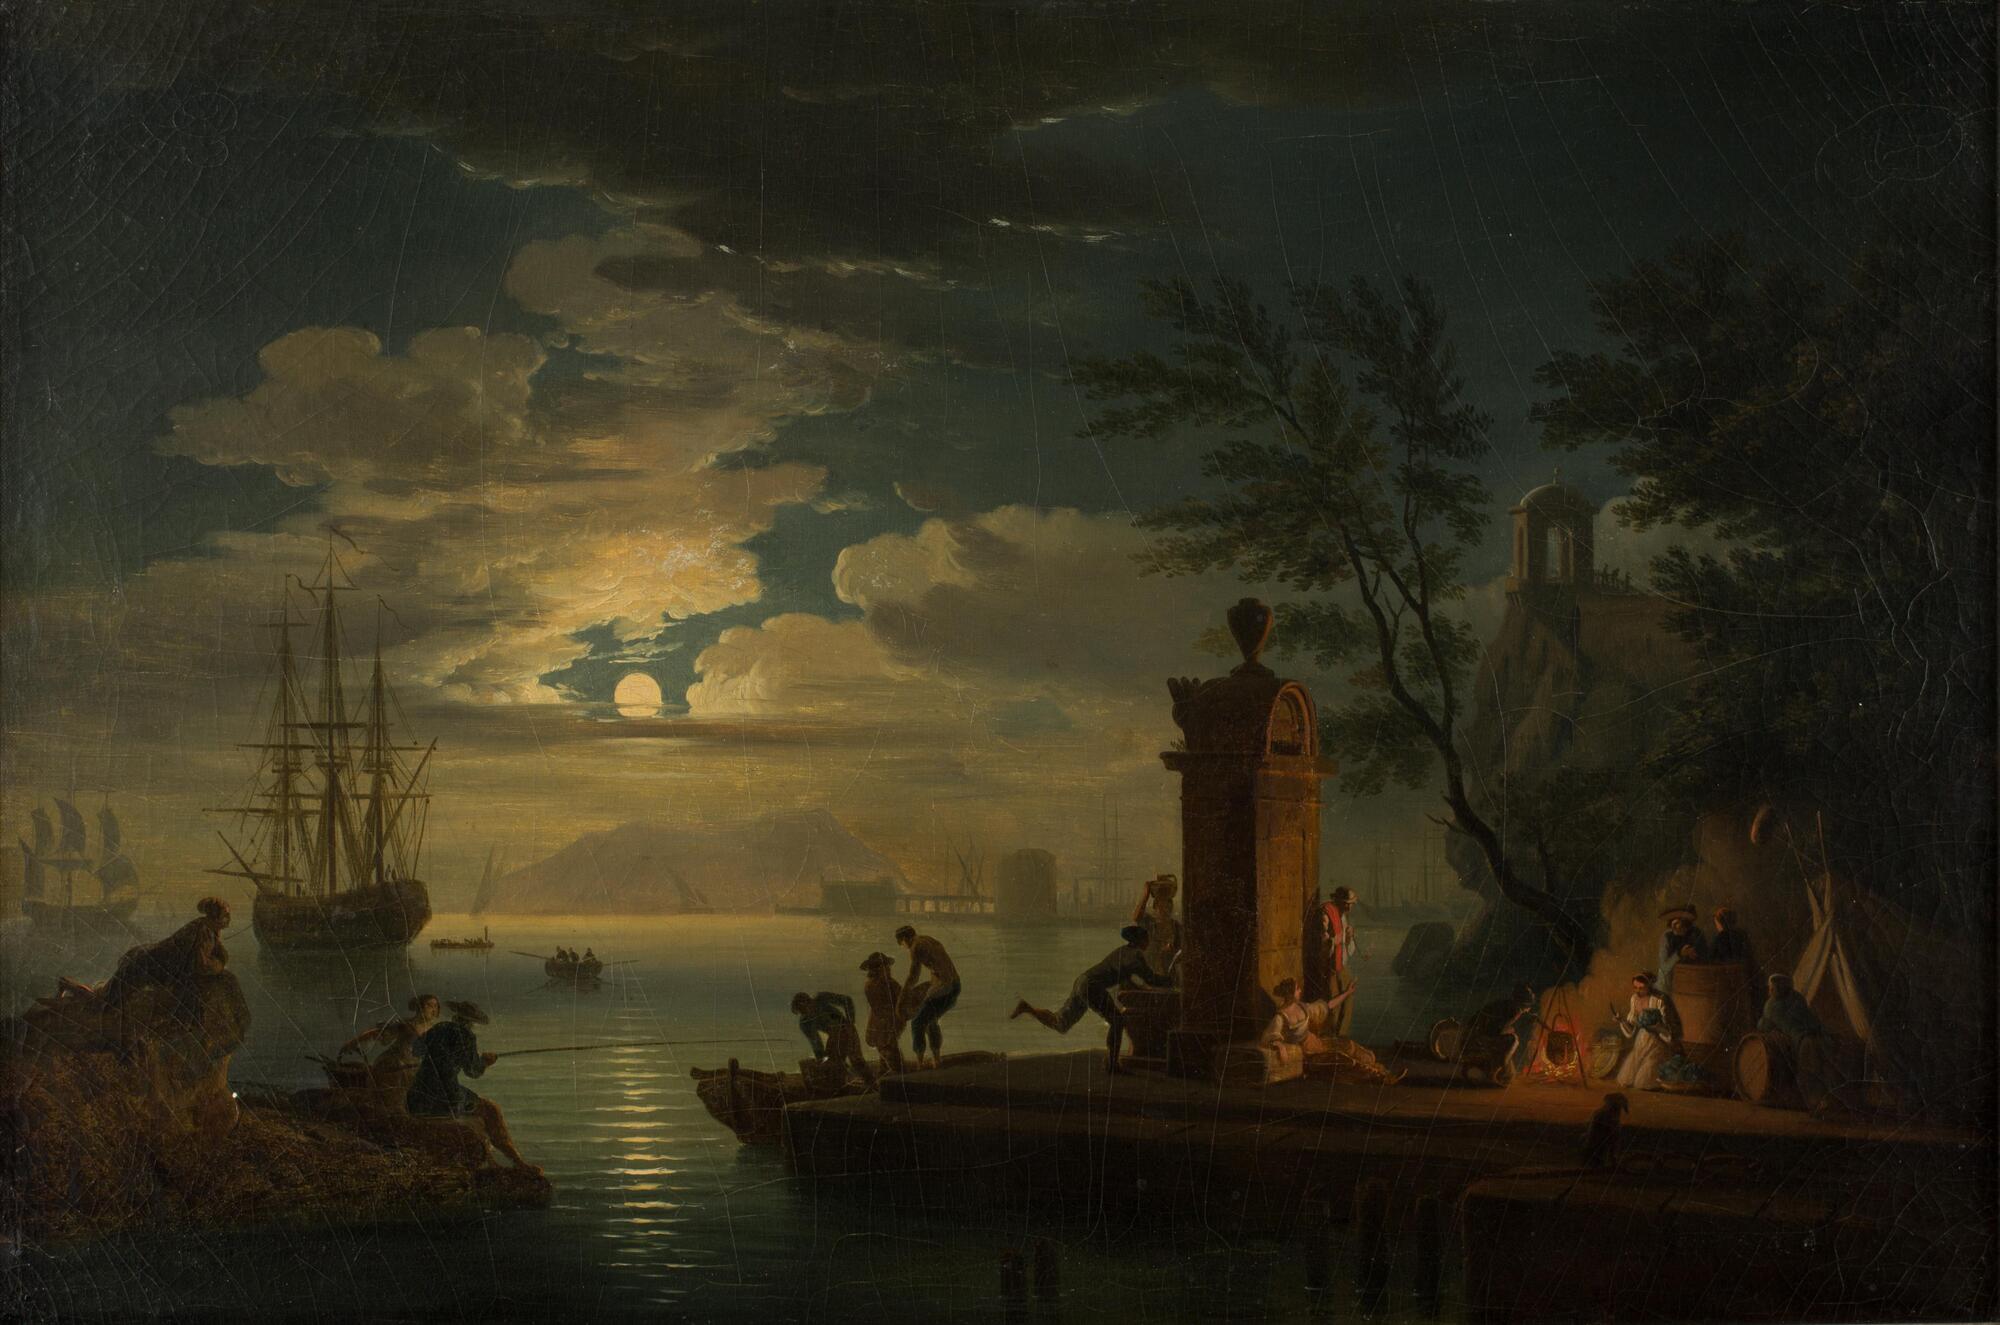 A nocturnal scene with ships, a dockyard, and a mountain range in the background.  People are gathered in the foreground partaking in various activities, illuminated in part by the moon and its reflection on the sea, as well as by a fire.